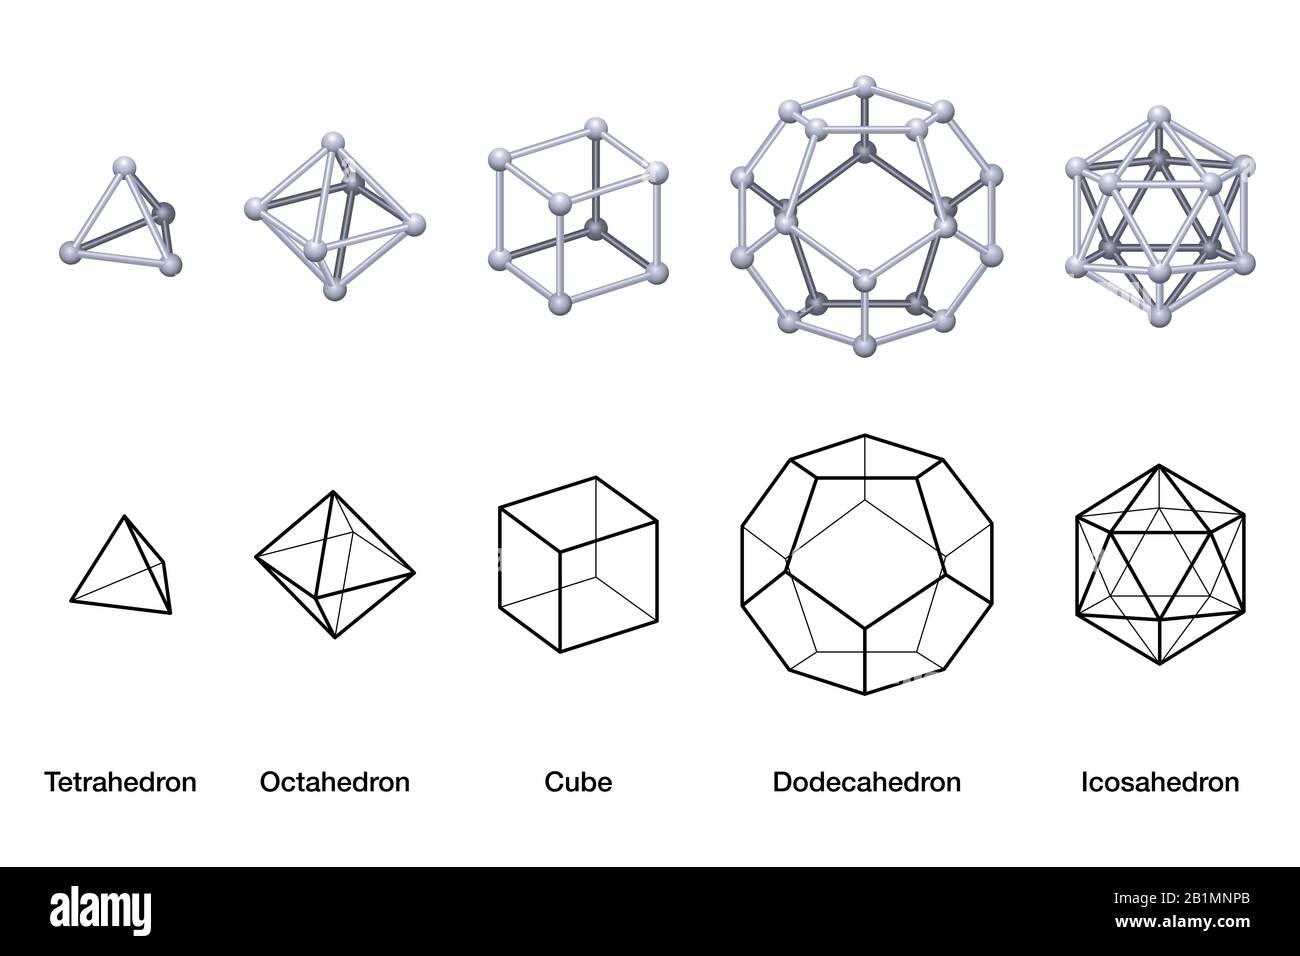 Gray colored Platonic solids 3D and black wireframe models. Regular convex polyhedrons with same number of identical faces meeting at each vertex. Stock Photo